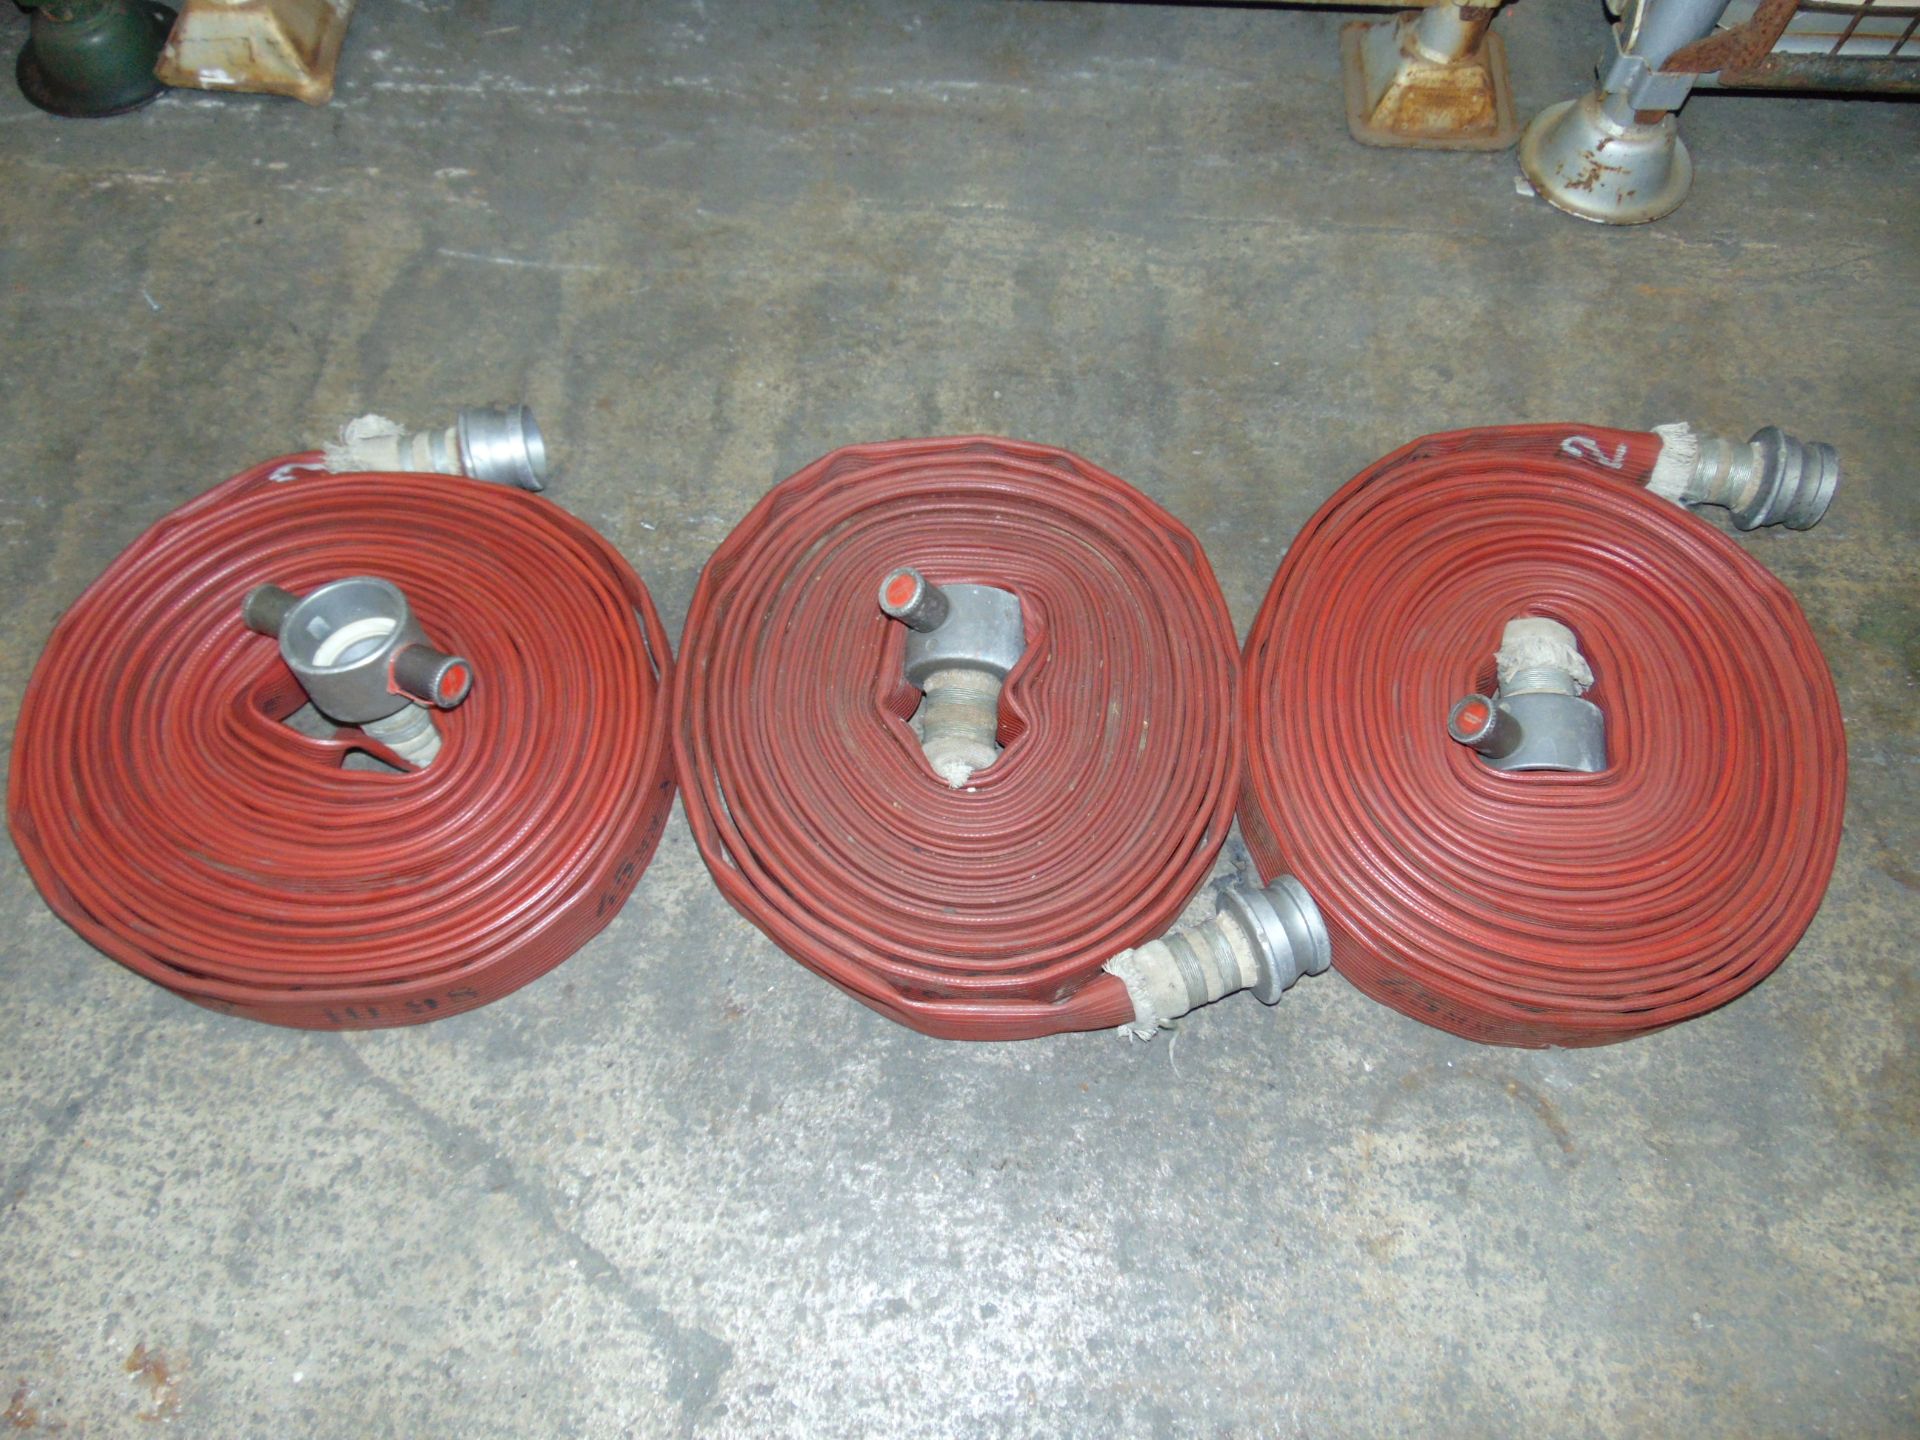 3 x Angus Duraline Layflat Fire Hoses 45mm X 23m with Couplings